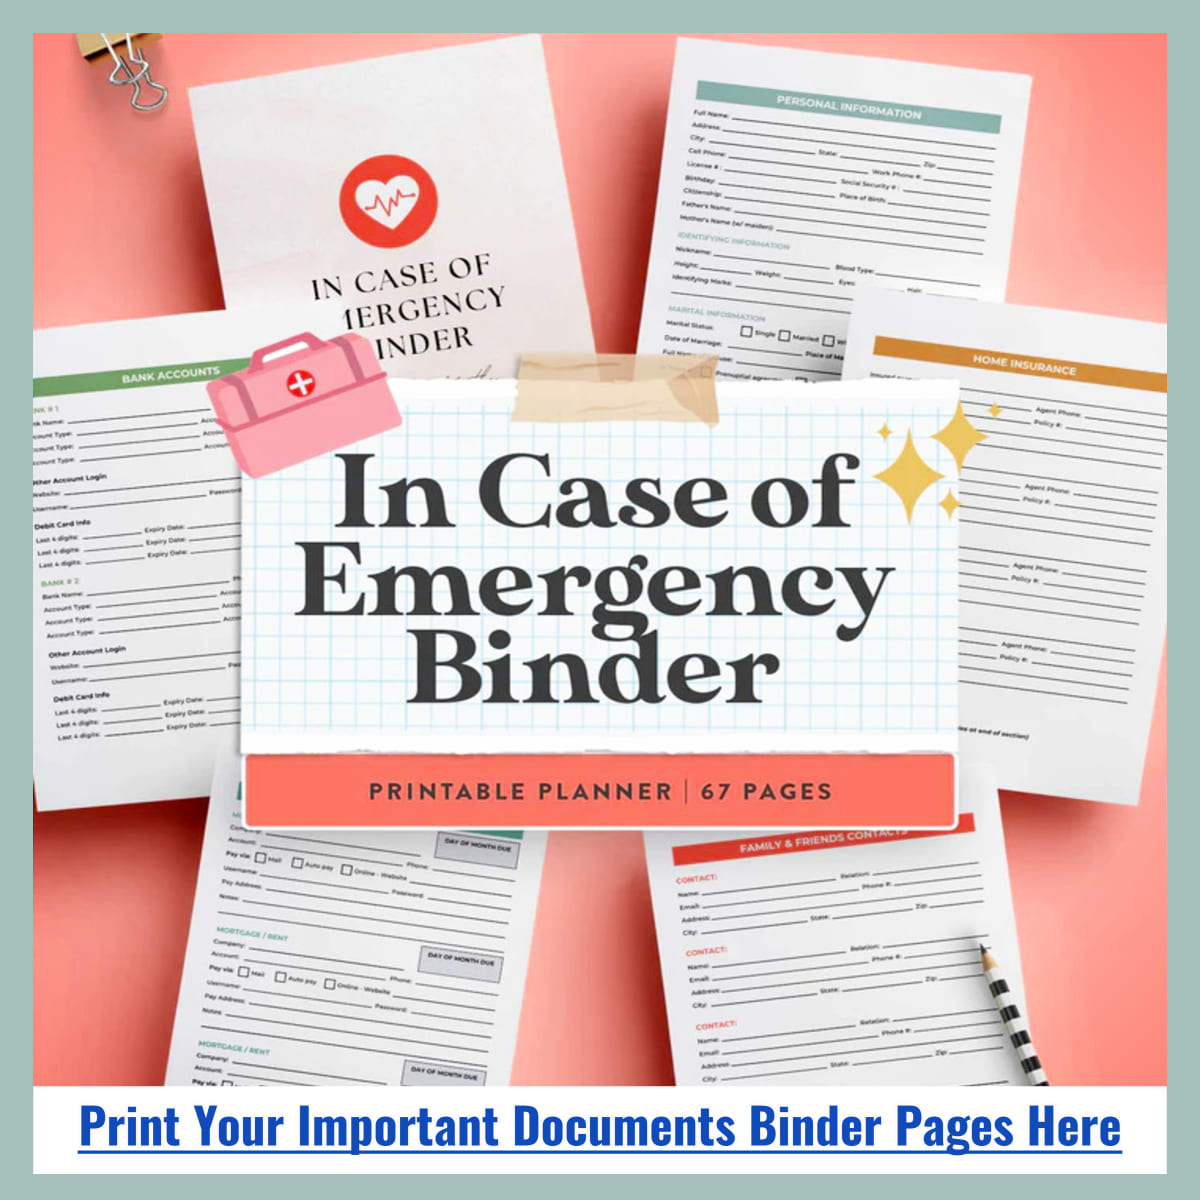 Printable Important Documents Binder Pages and Checklists For Organizing Paperwork